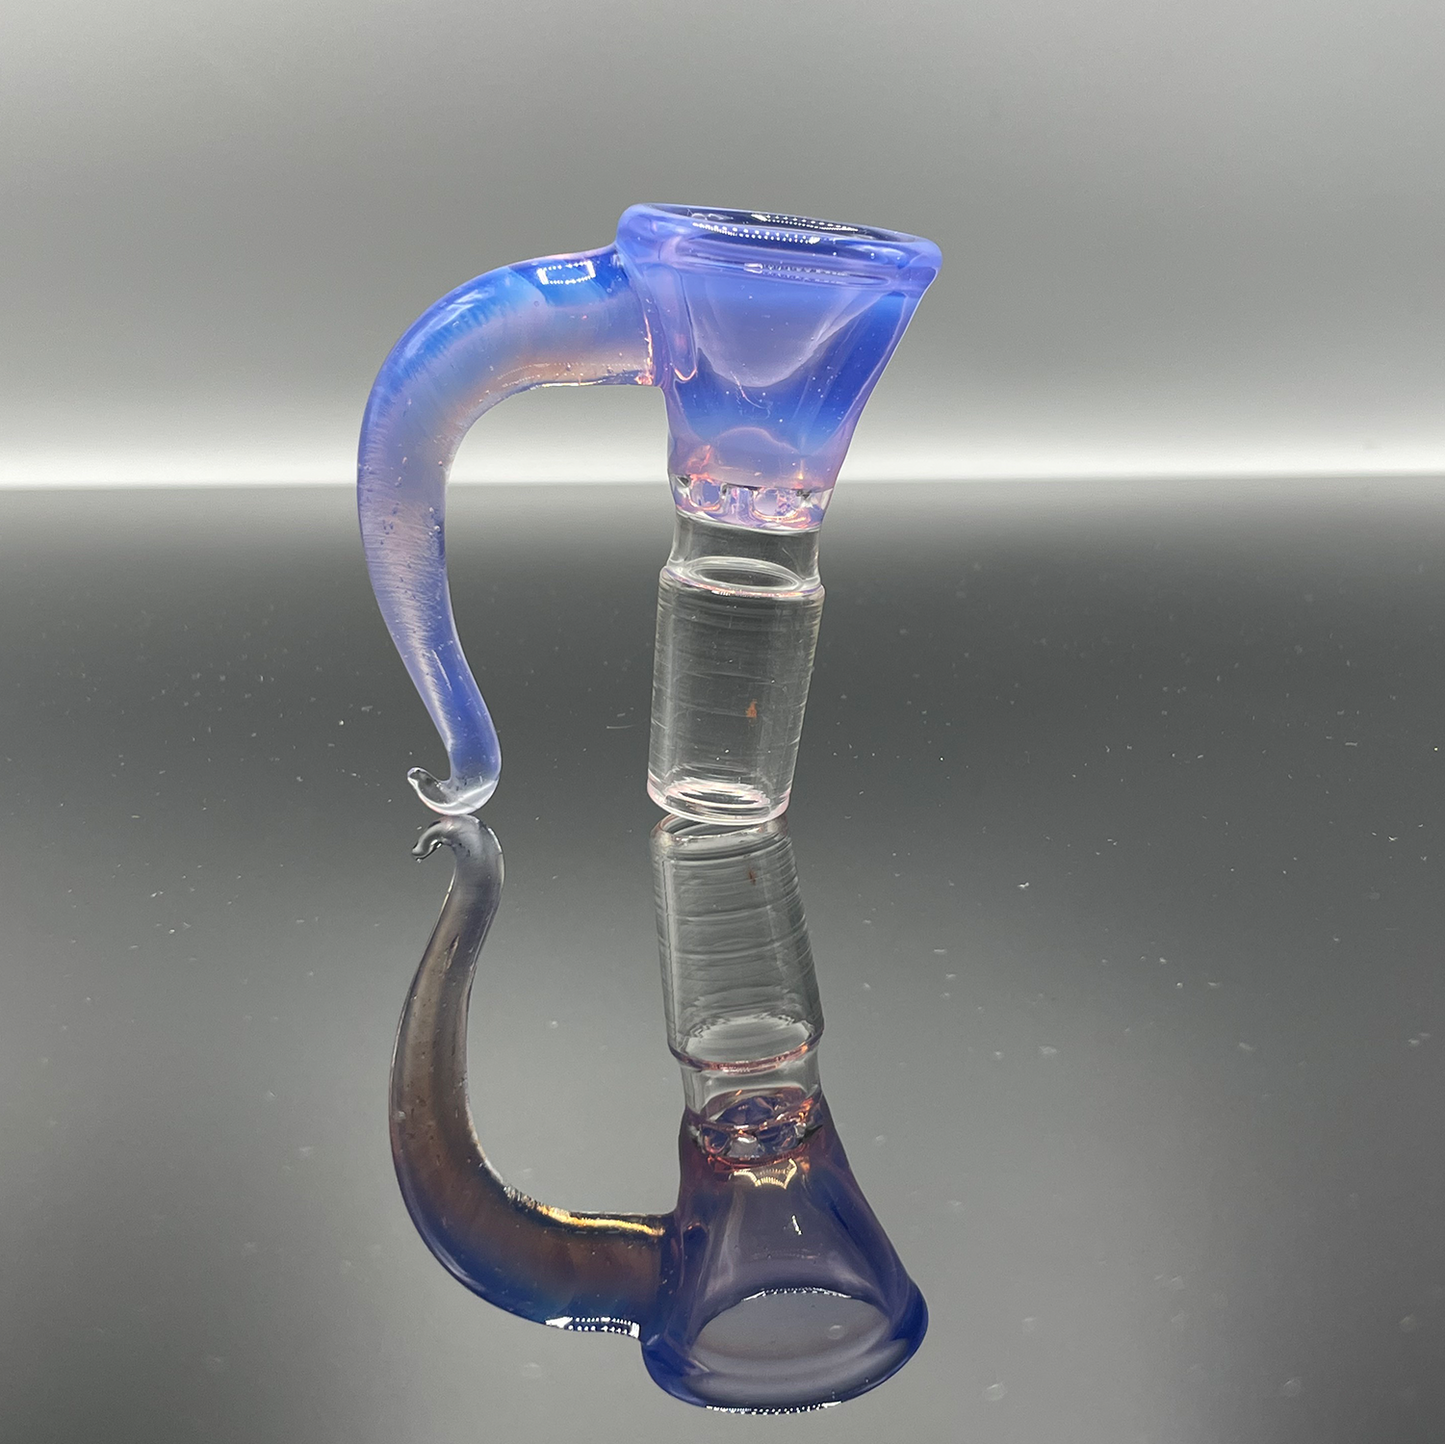 18mm glass slide used for smoking out of glass bongs